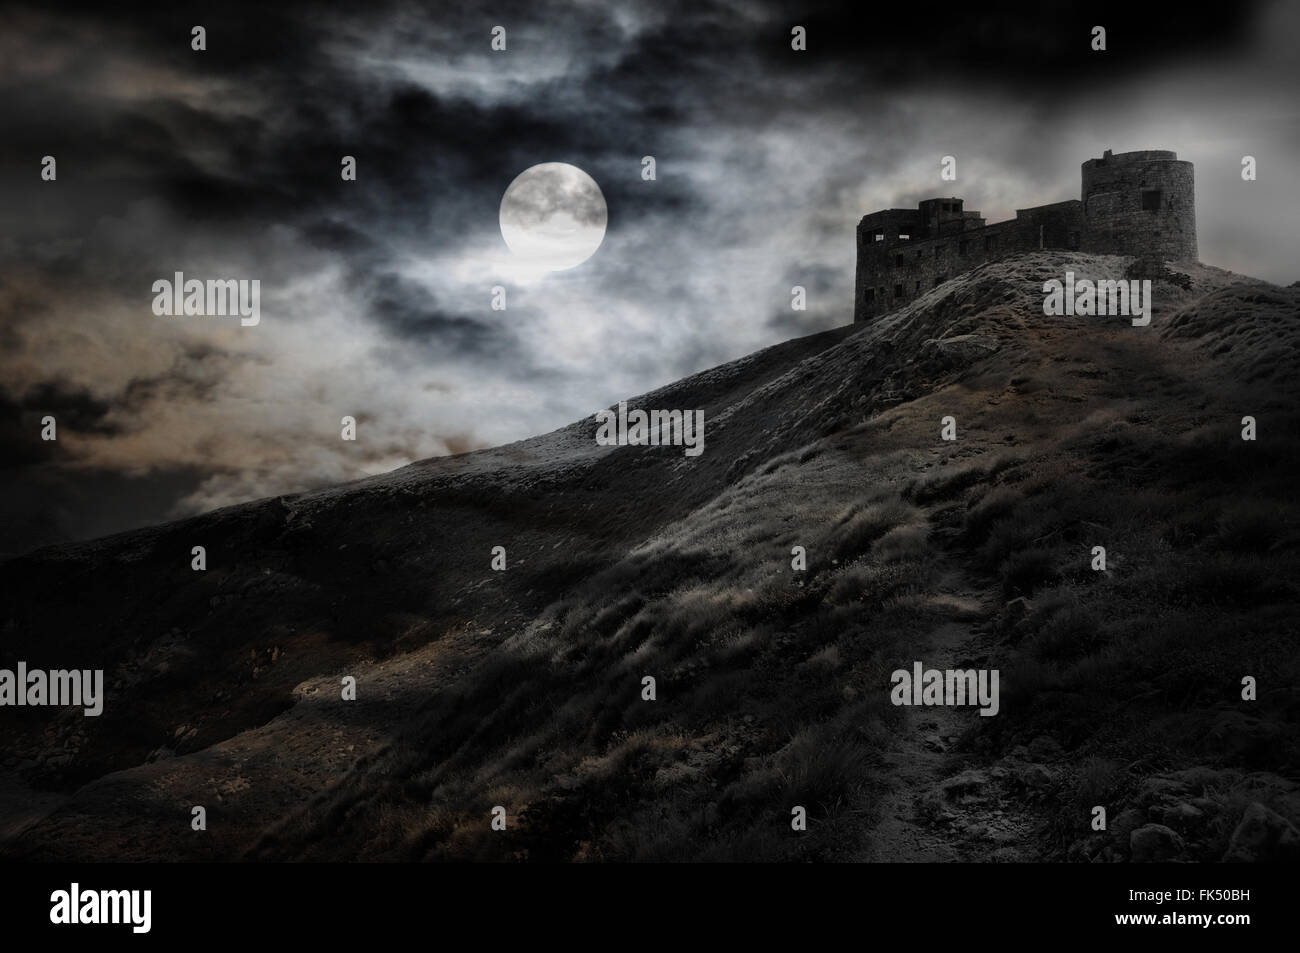 Night, moon and dark fortress black and white halloween theme Stock Photo